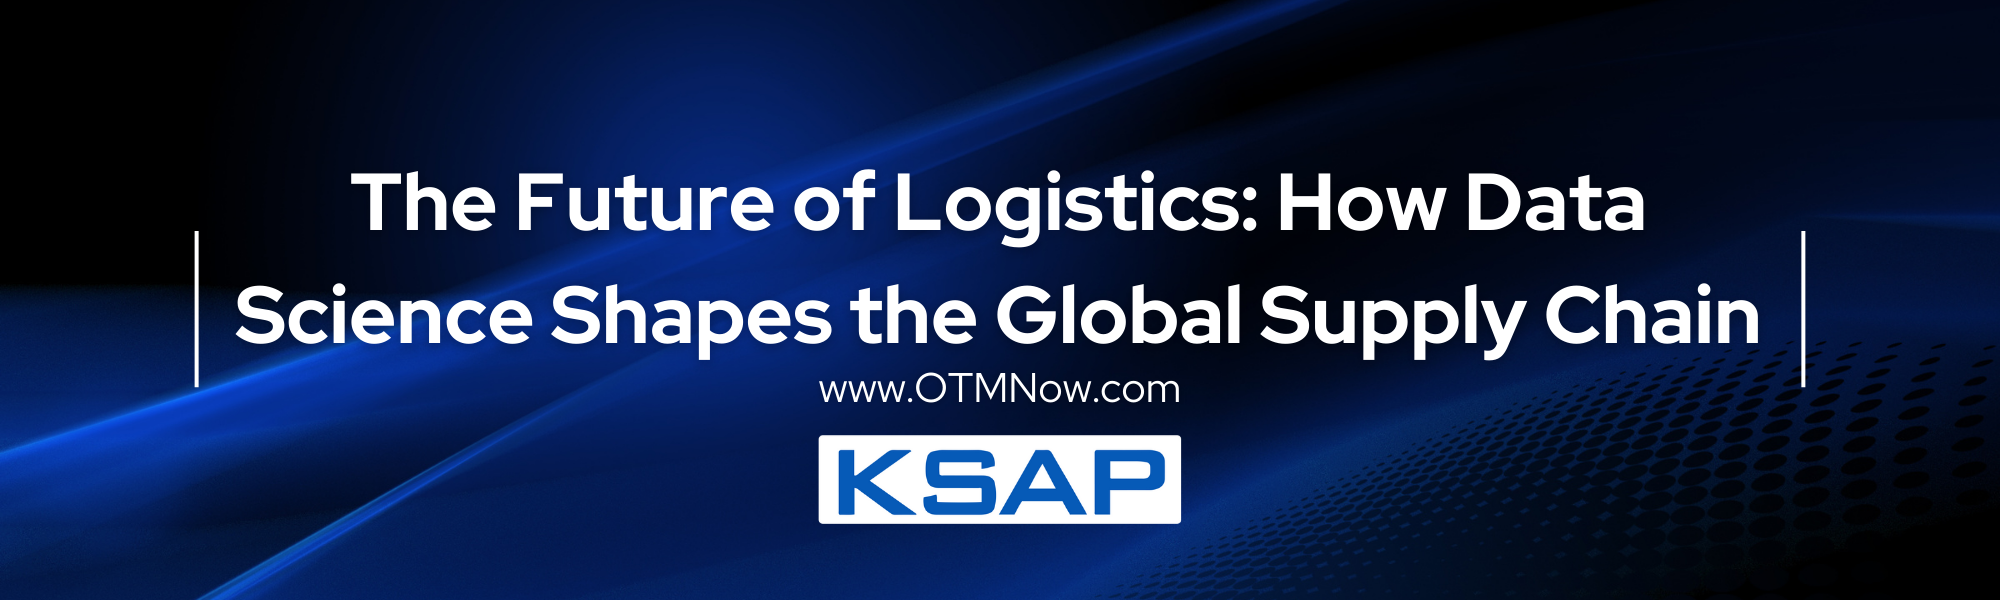 The Future of Logistics: How Data Science Shapes the Global Supply Chain